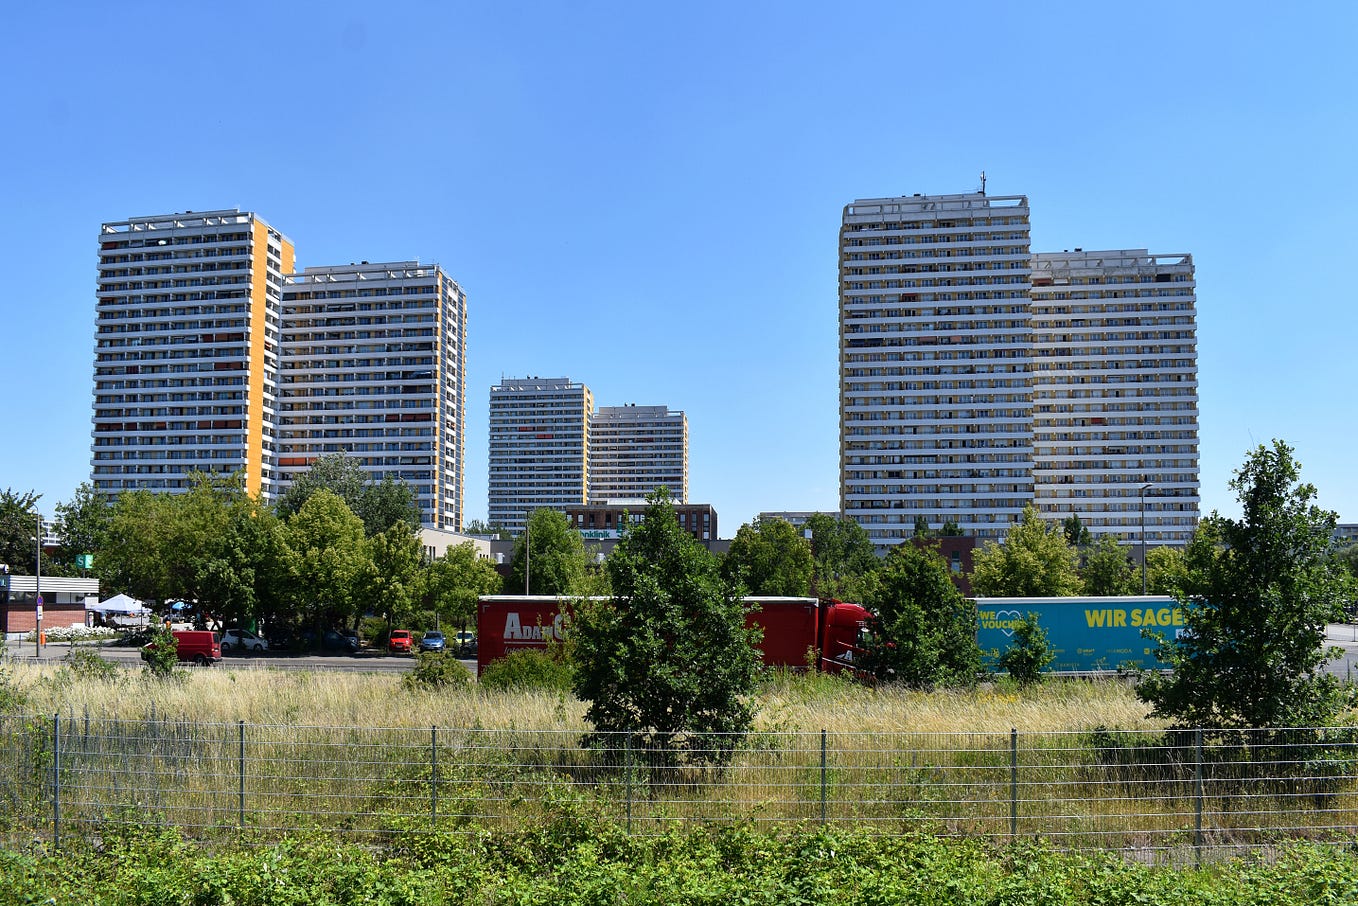 Welcome to Marzahn, a German neighborhood of the far right